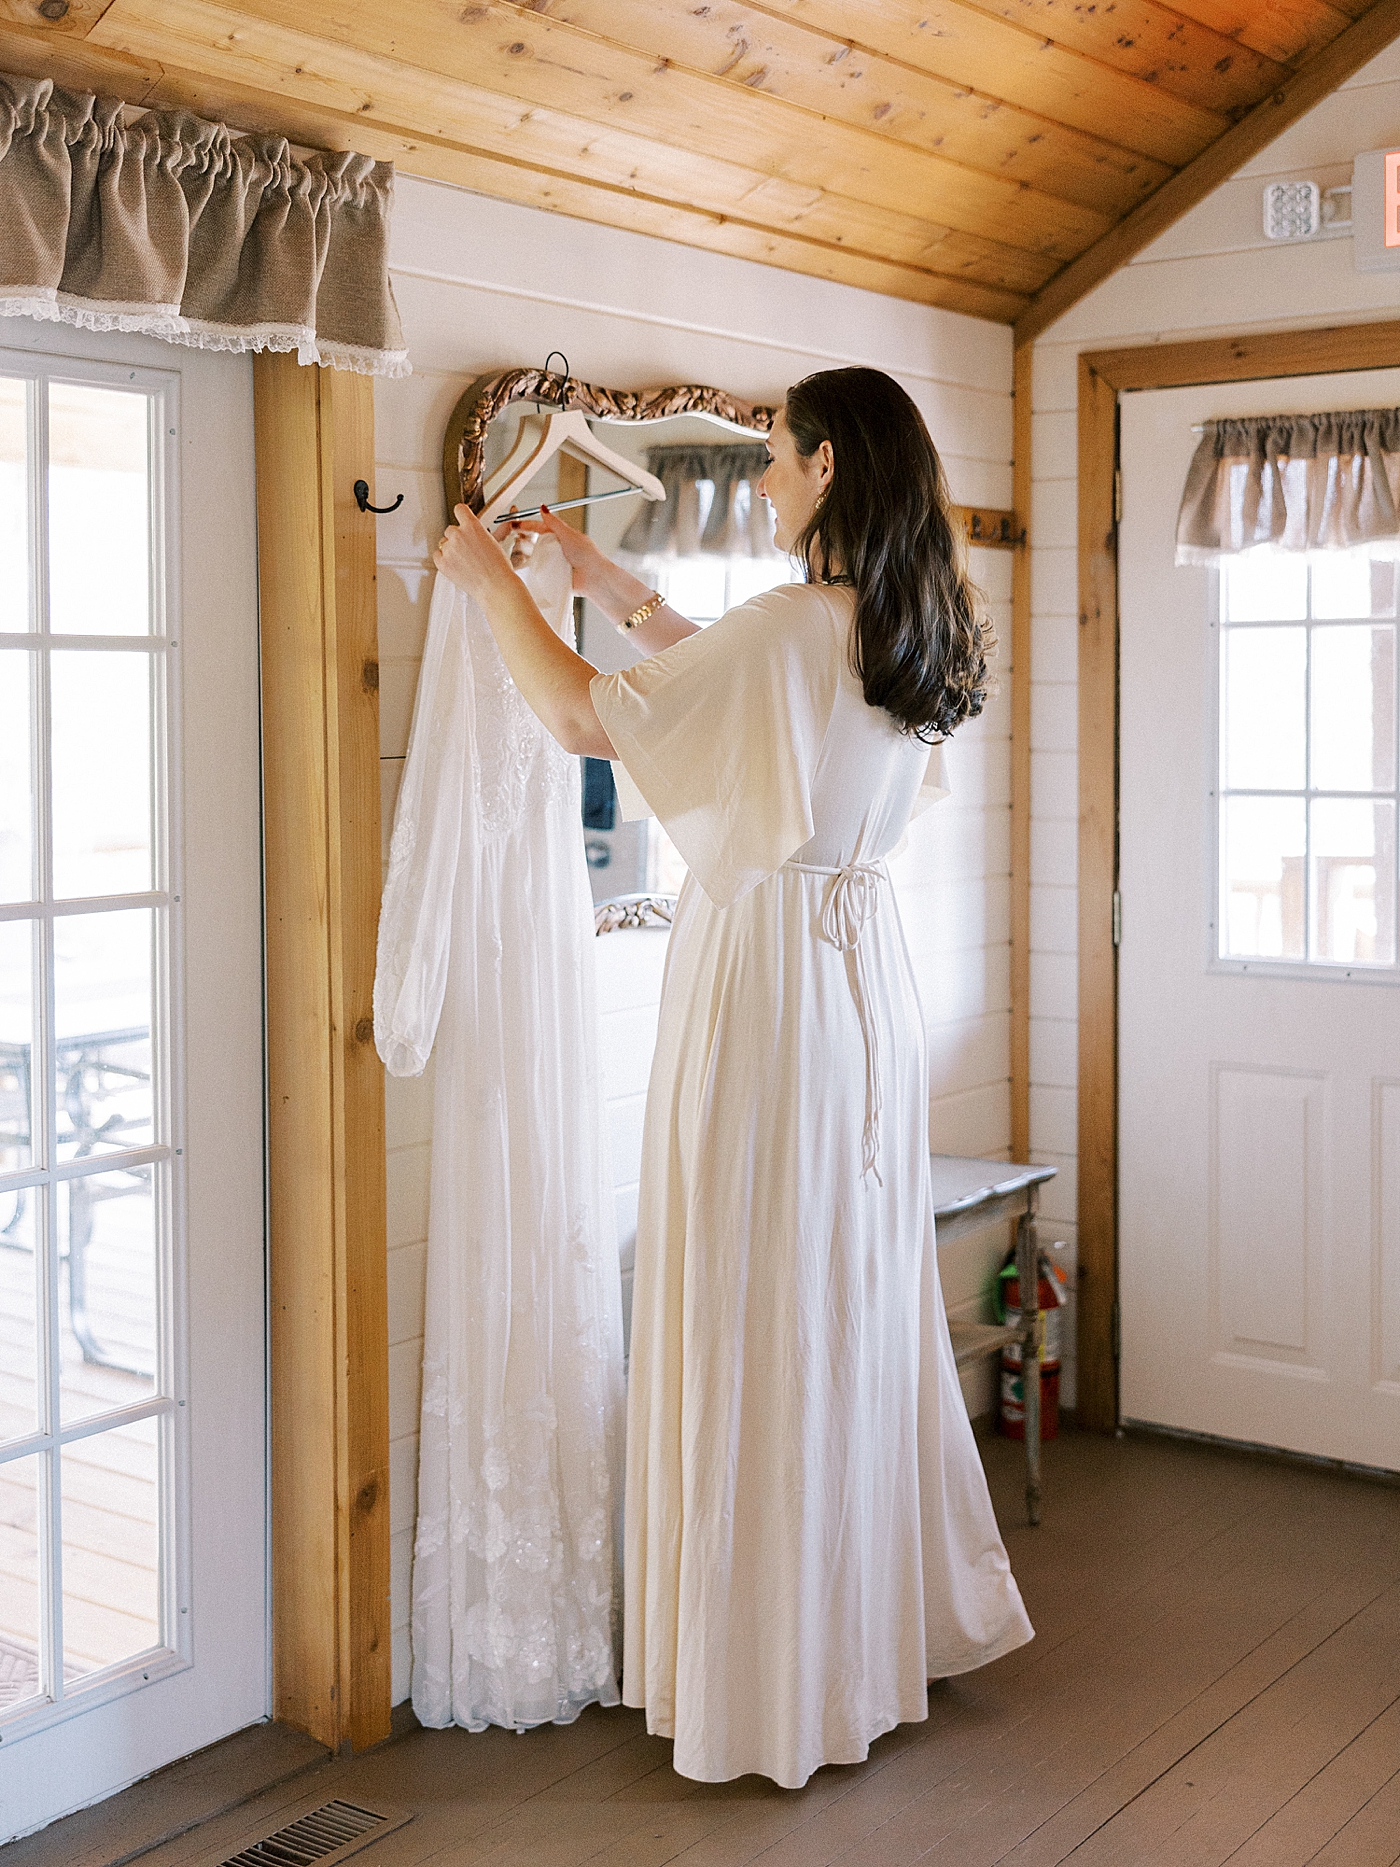 Bride getting her gown ready | Photo by Diane Sotero Photography